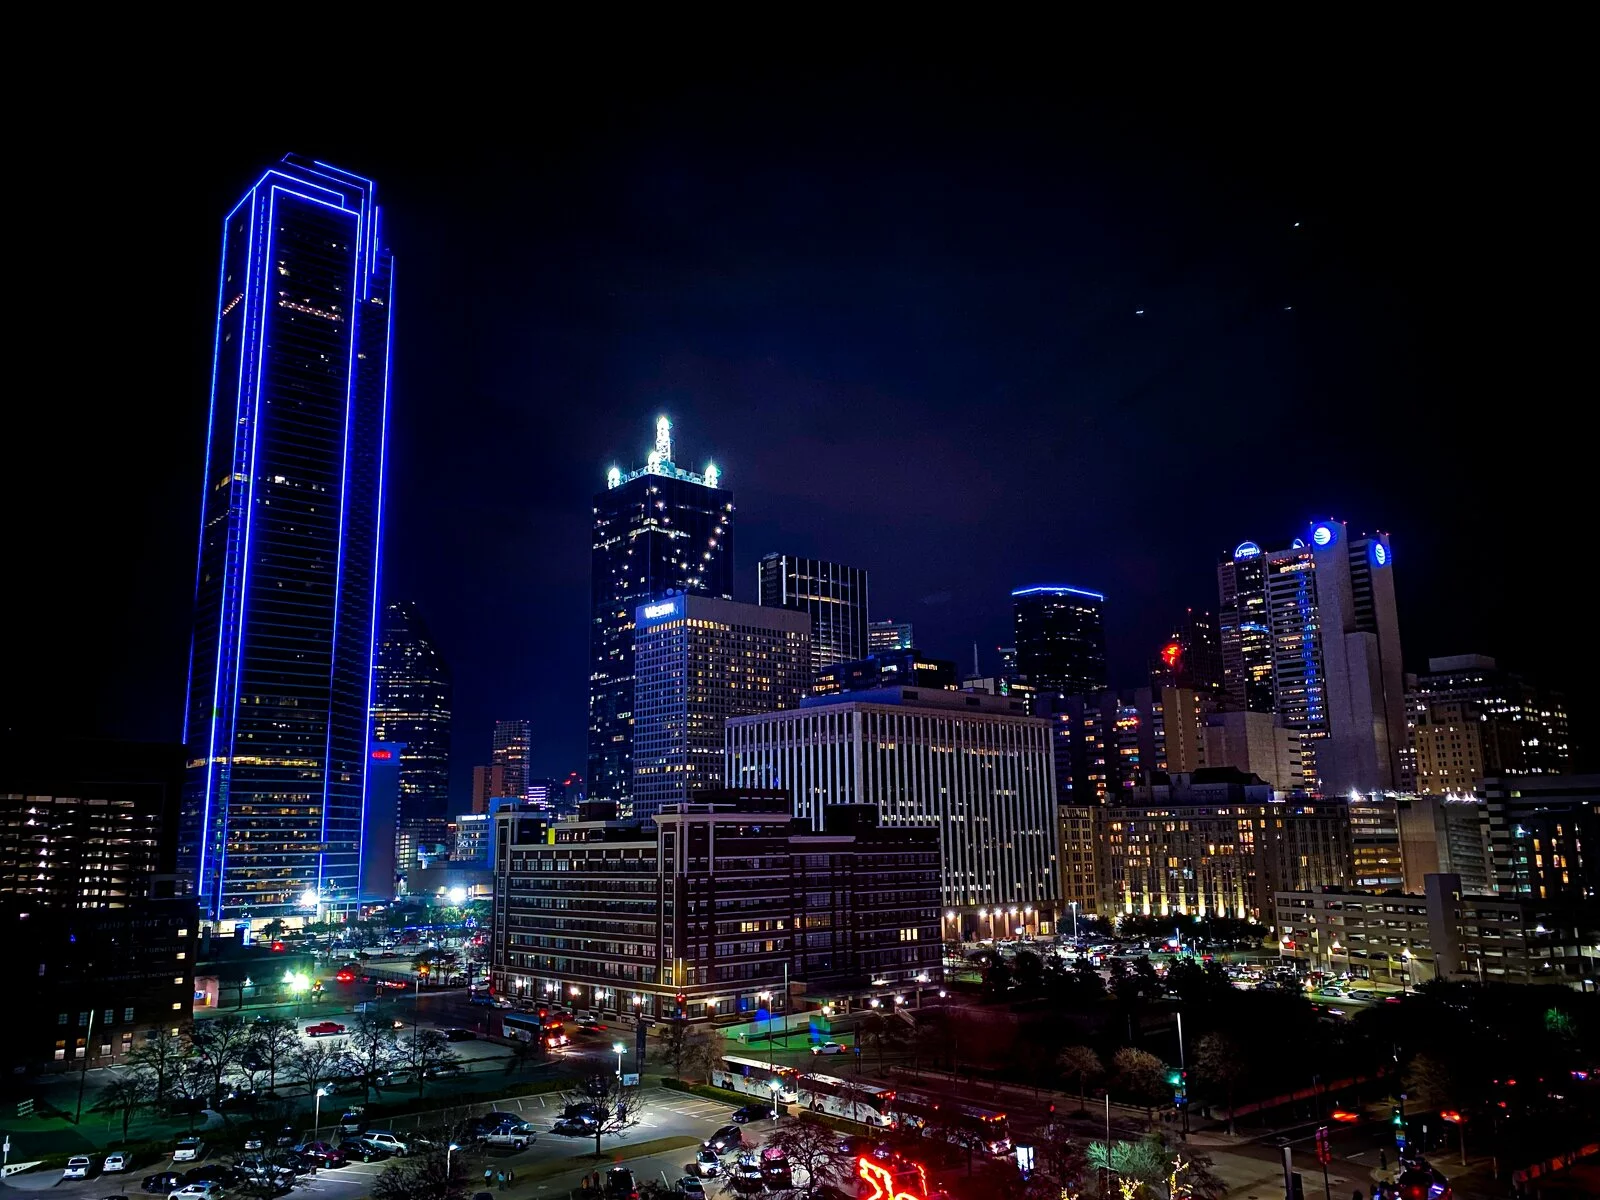 Landscape photo of the Dallas/Ft. Worth Skyline, photo taken at night.